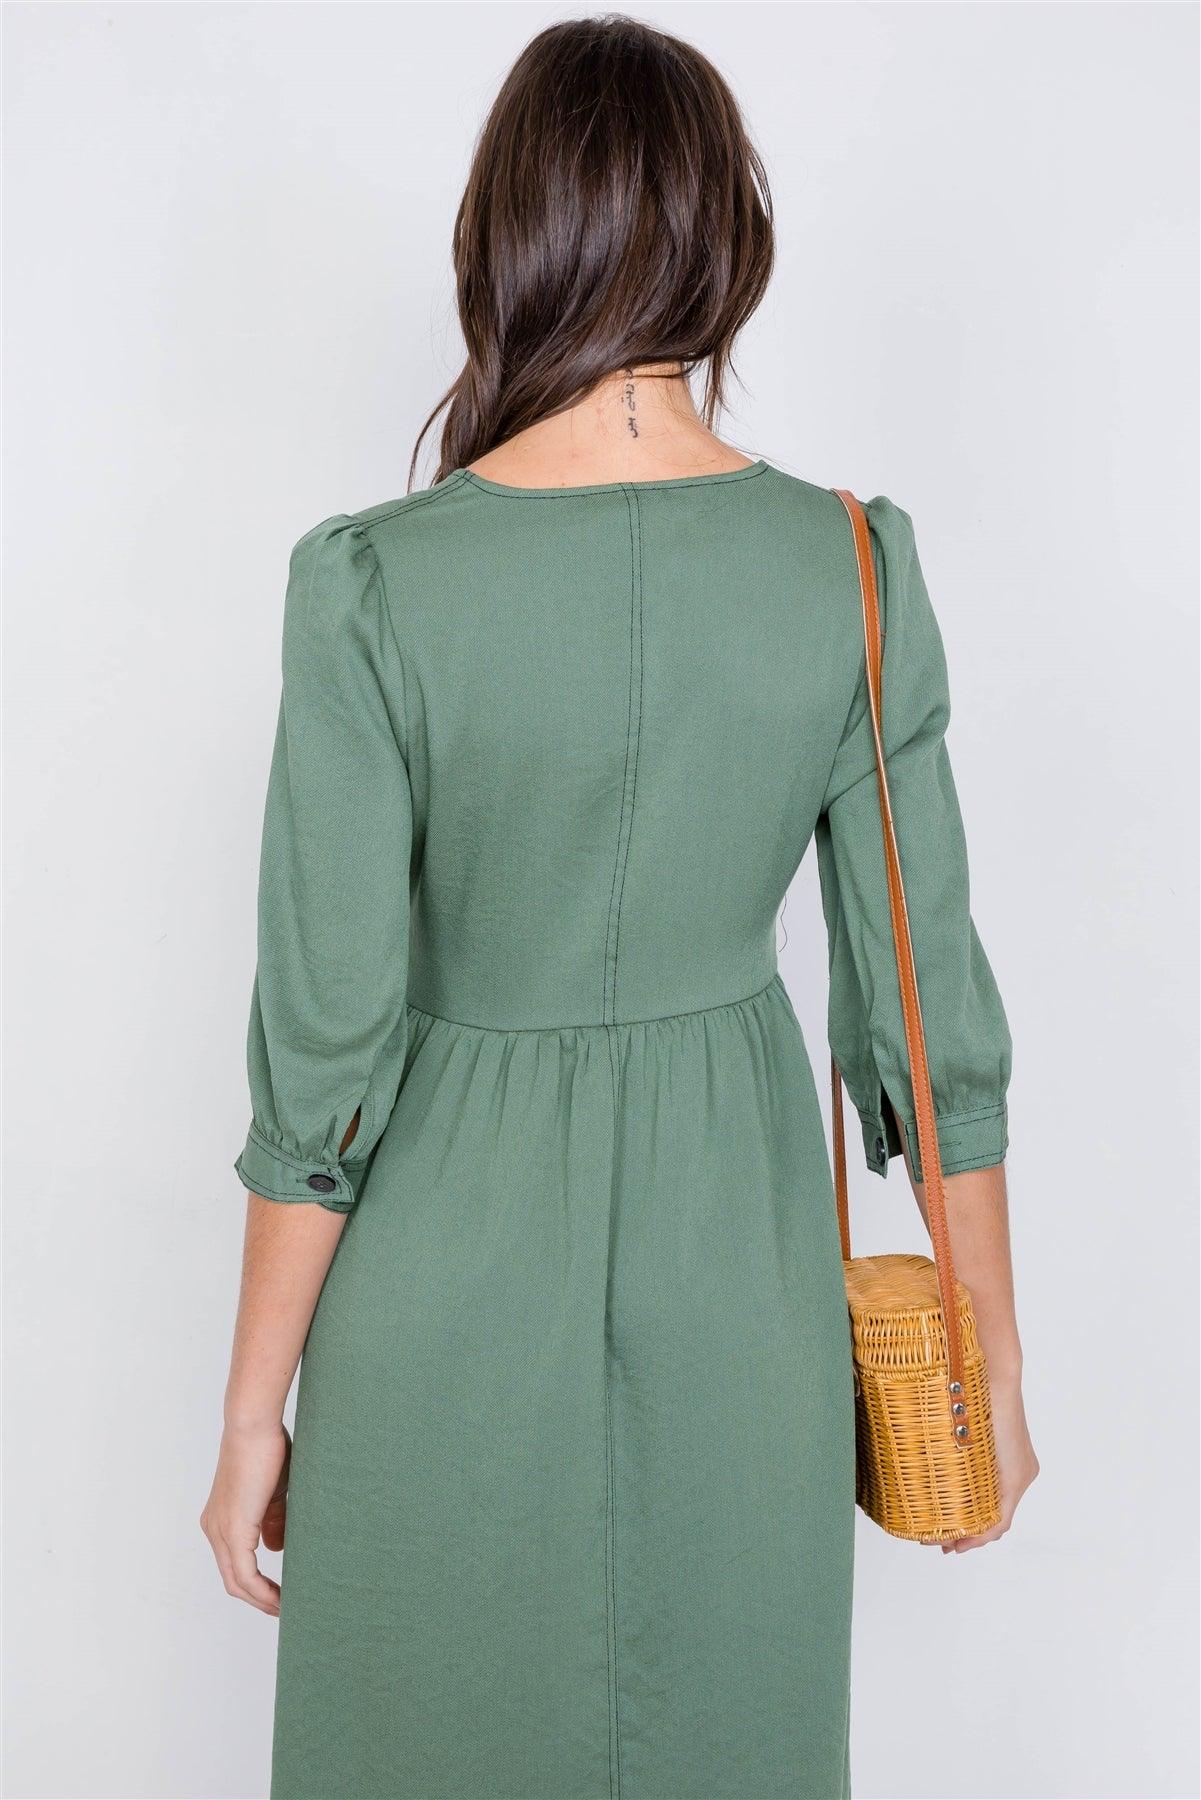 Olive V-Neck Front Button 3/4 Puff Sleeve Casual Midi Dress /1-2-3